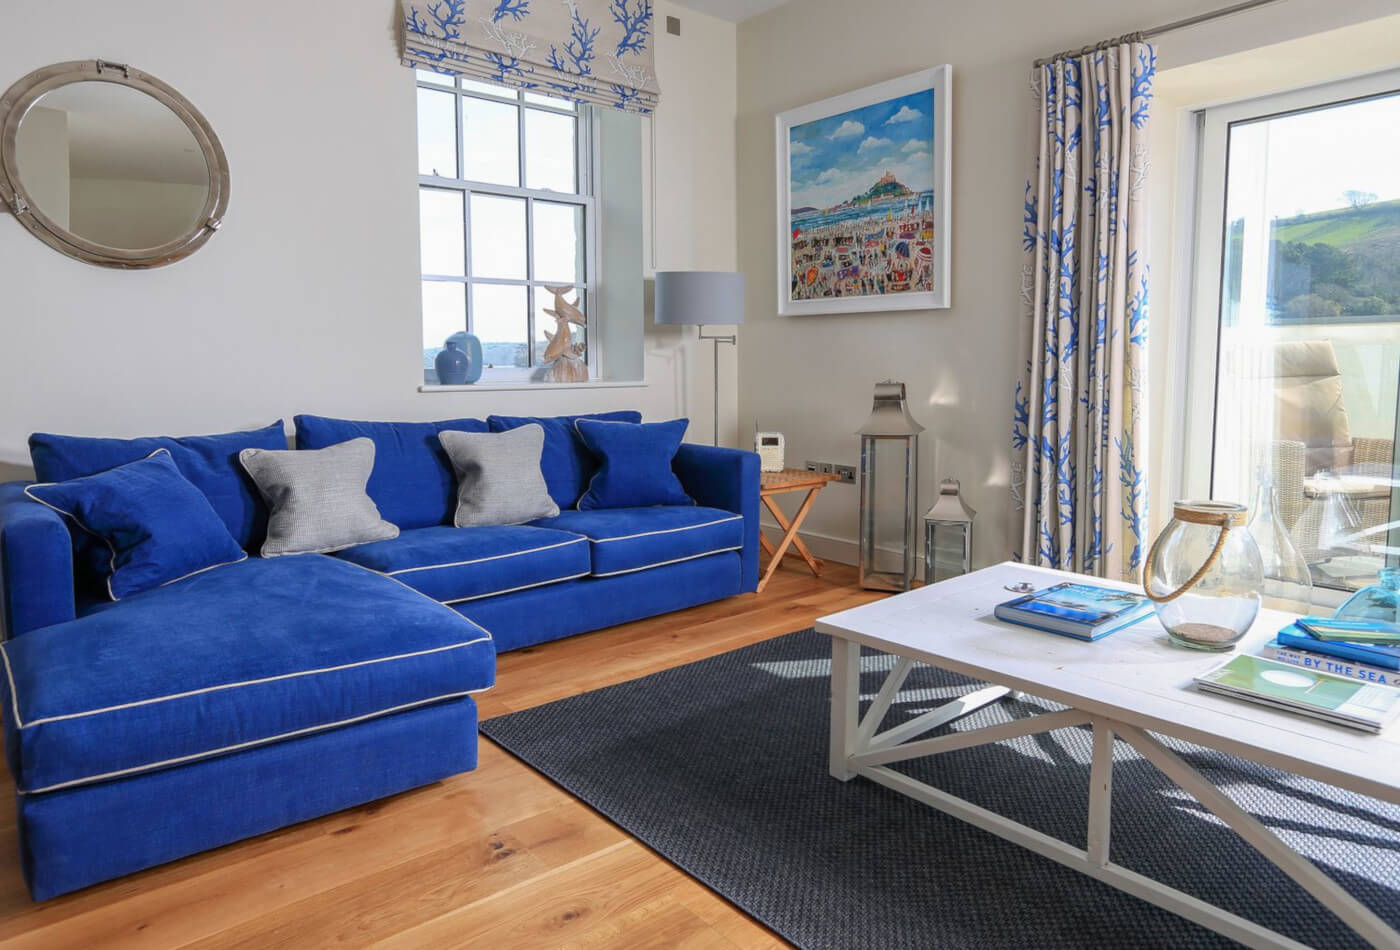 Guest information pack on table in lounge with blue sofas and patio doors.